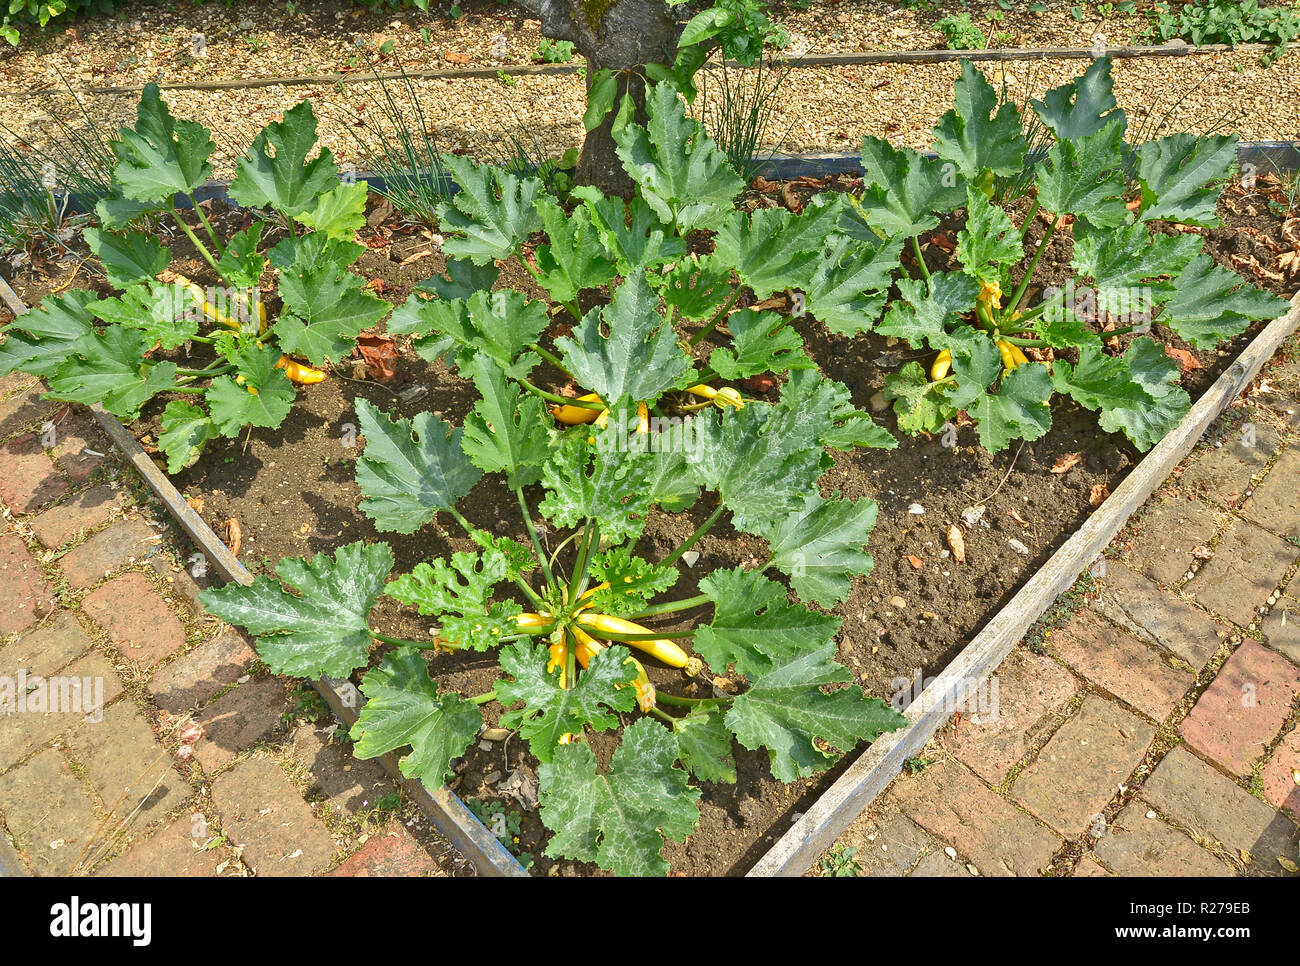 Courgette 'Soliel' plants in a enclose bed in a vegetable garden Stock Photo